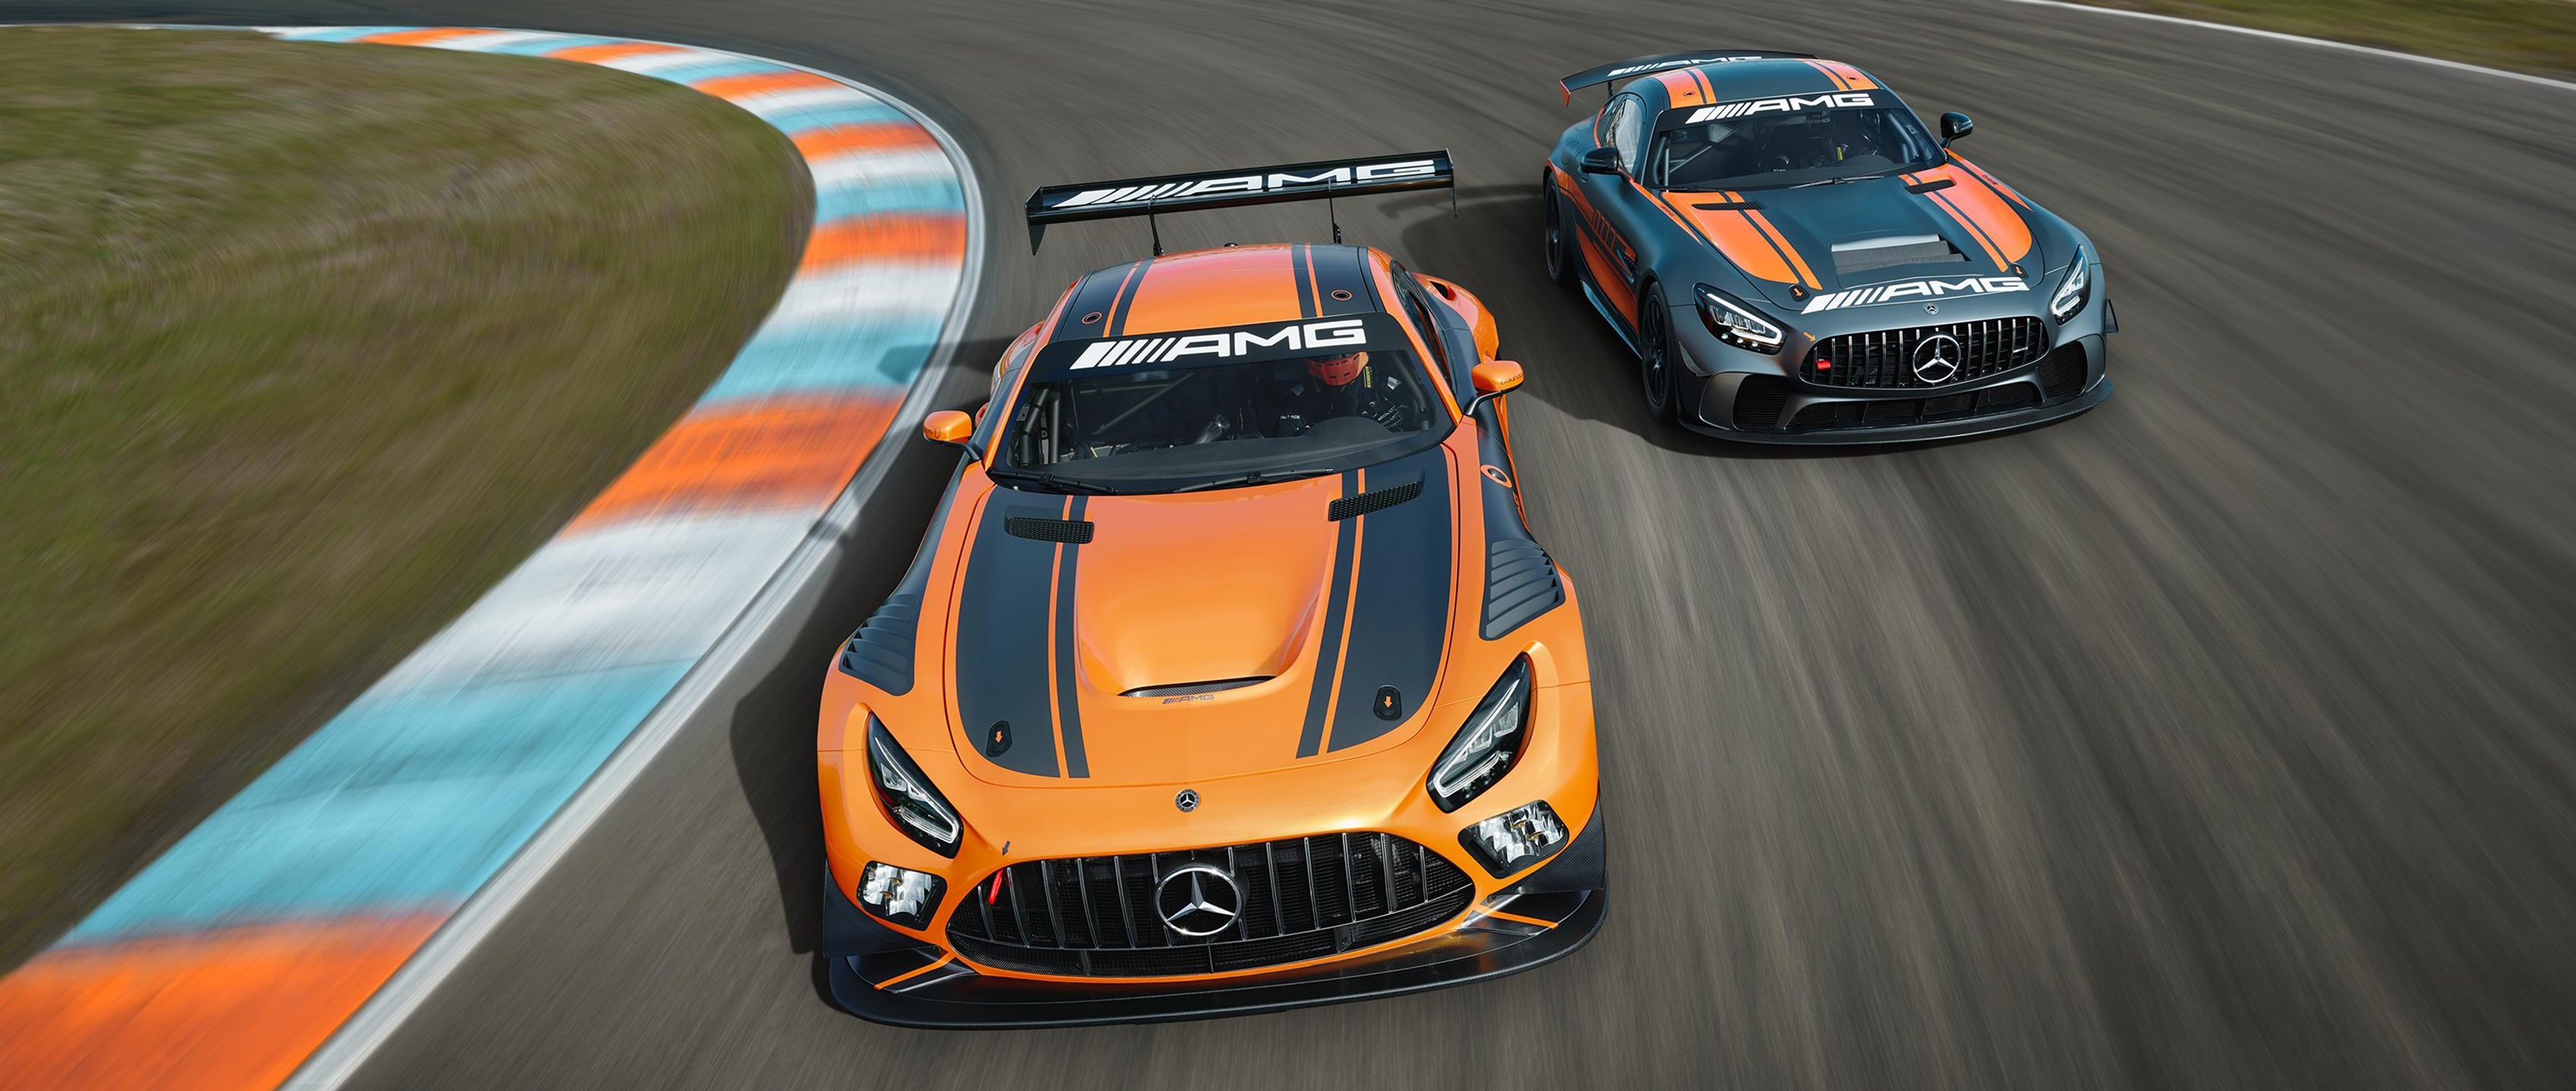 Motorsports: Mercedes-AMG GT3 and GT4 roadsters, Grand tourers - cars designed for high-speed and long-distance travel. 3400x1440 Dual Screen Wallpaper.